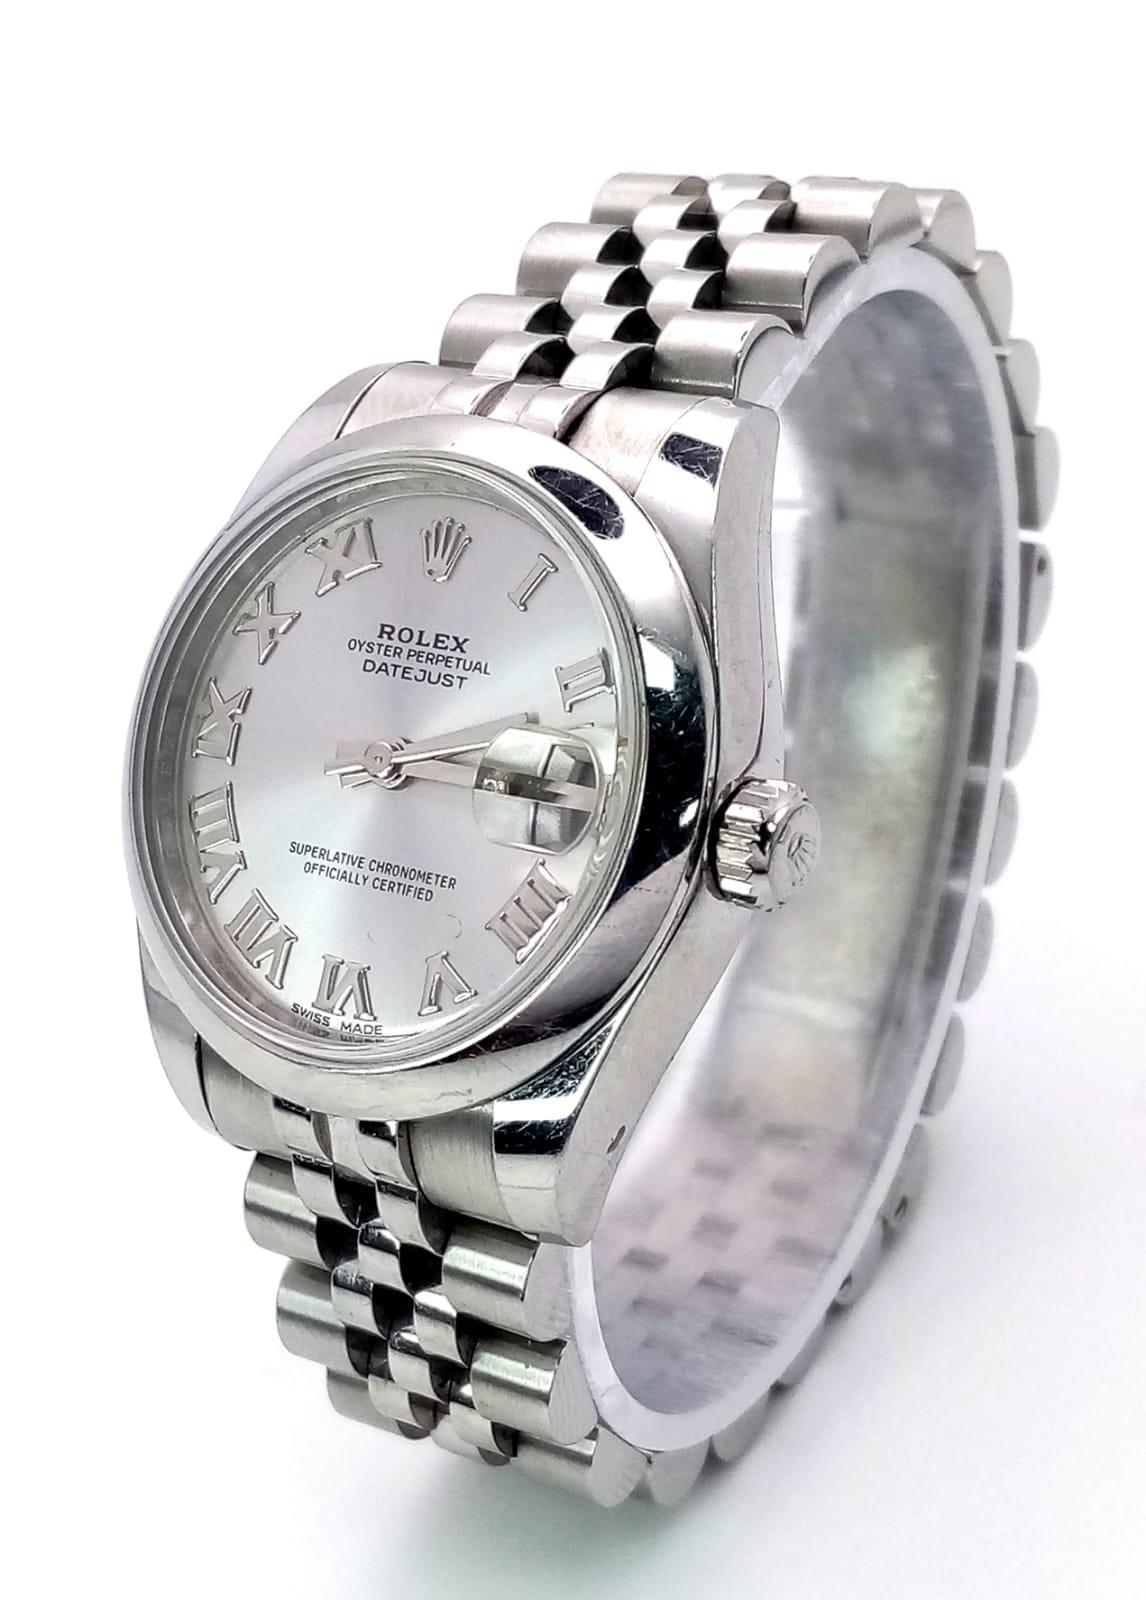 A MID SIZE ROLEX PERPETUAL DATEJUST IN STAINLESS STEEL WITH SILVERTONE DIAL AND ROMAN NUMERALS . - Image 2 of 8